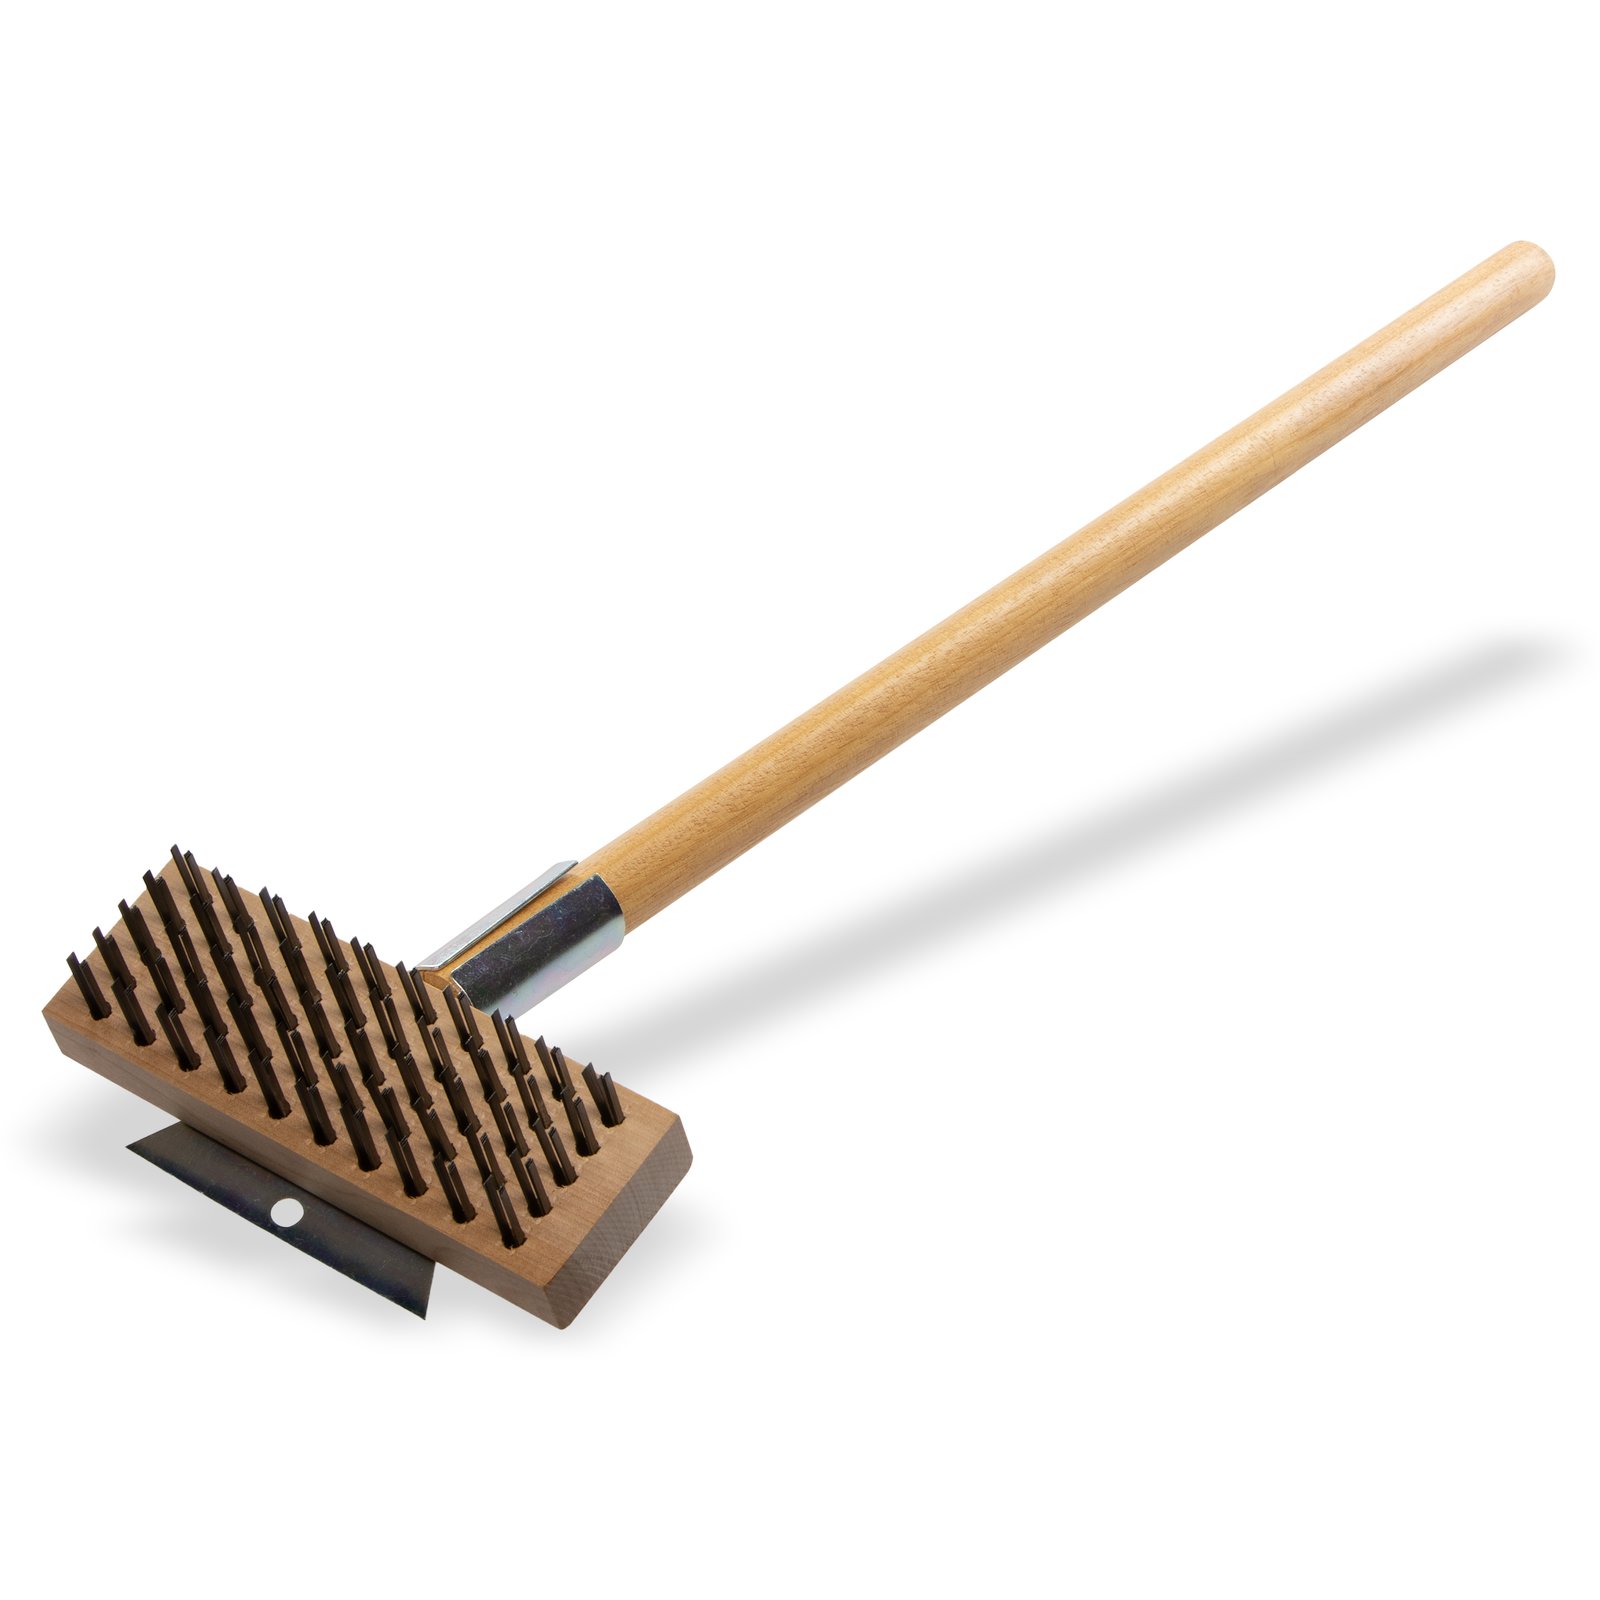 Carlisle FoodService Products 4152000 Oven Brush & Scraper With Handle,  8-1/2 Wide, 1-1/4 Brass Bristles, 42 Long Hardwood Handle